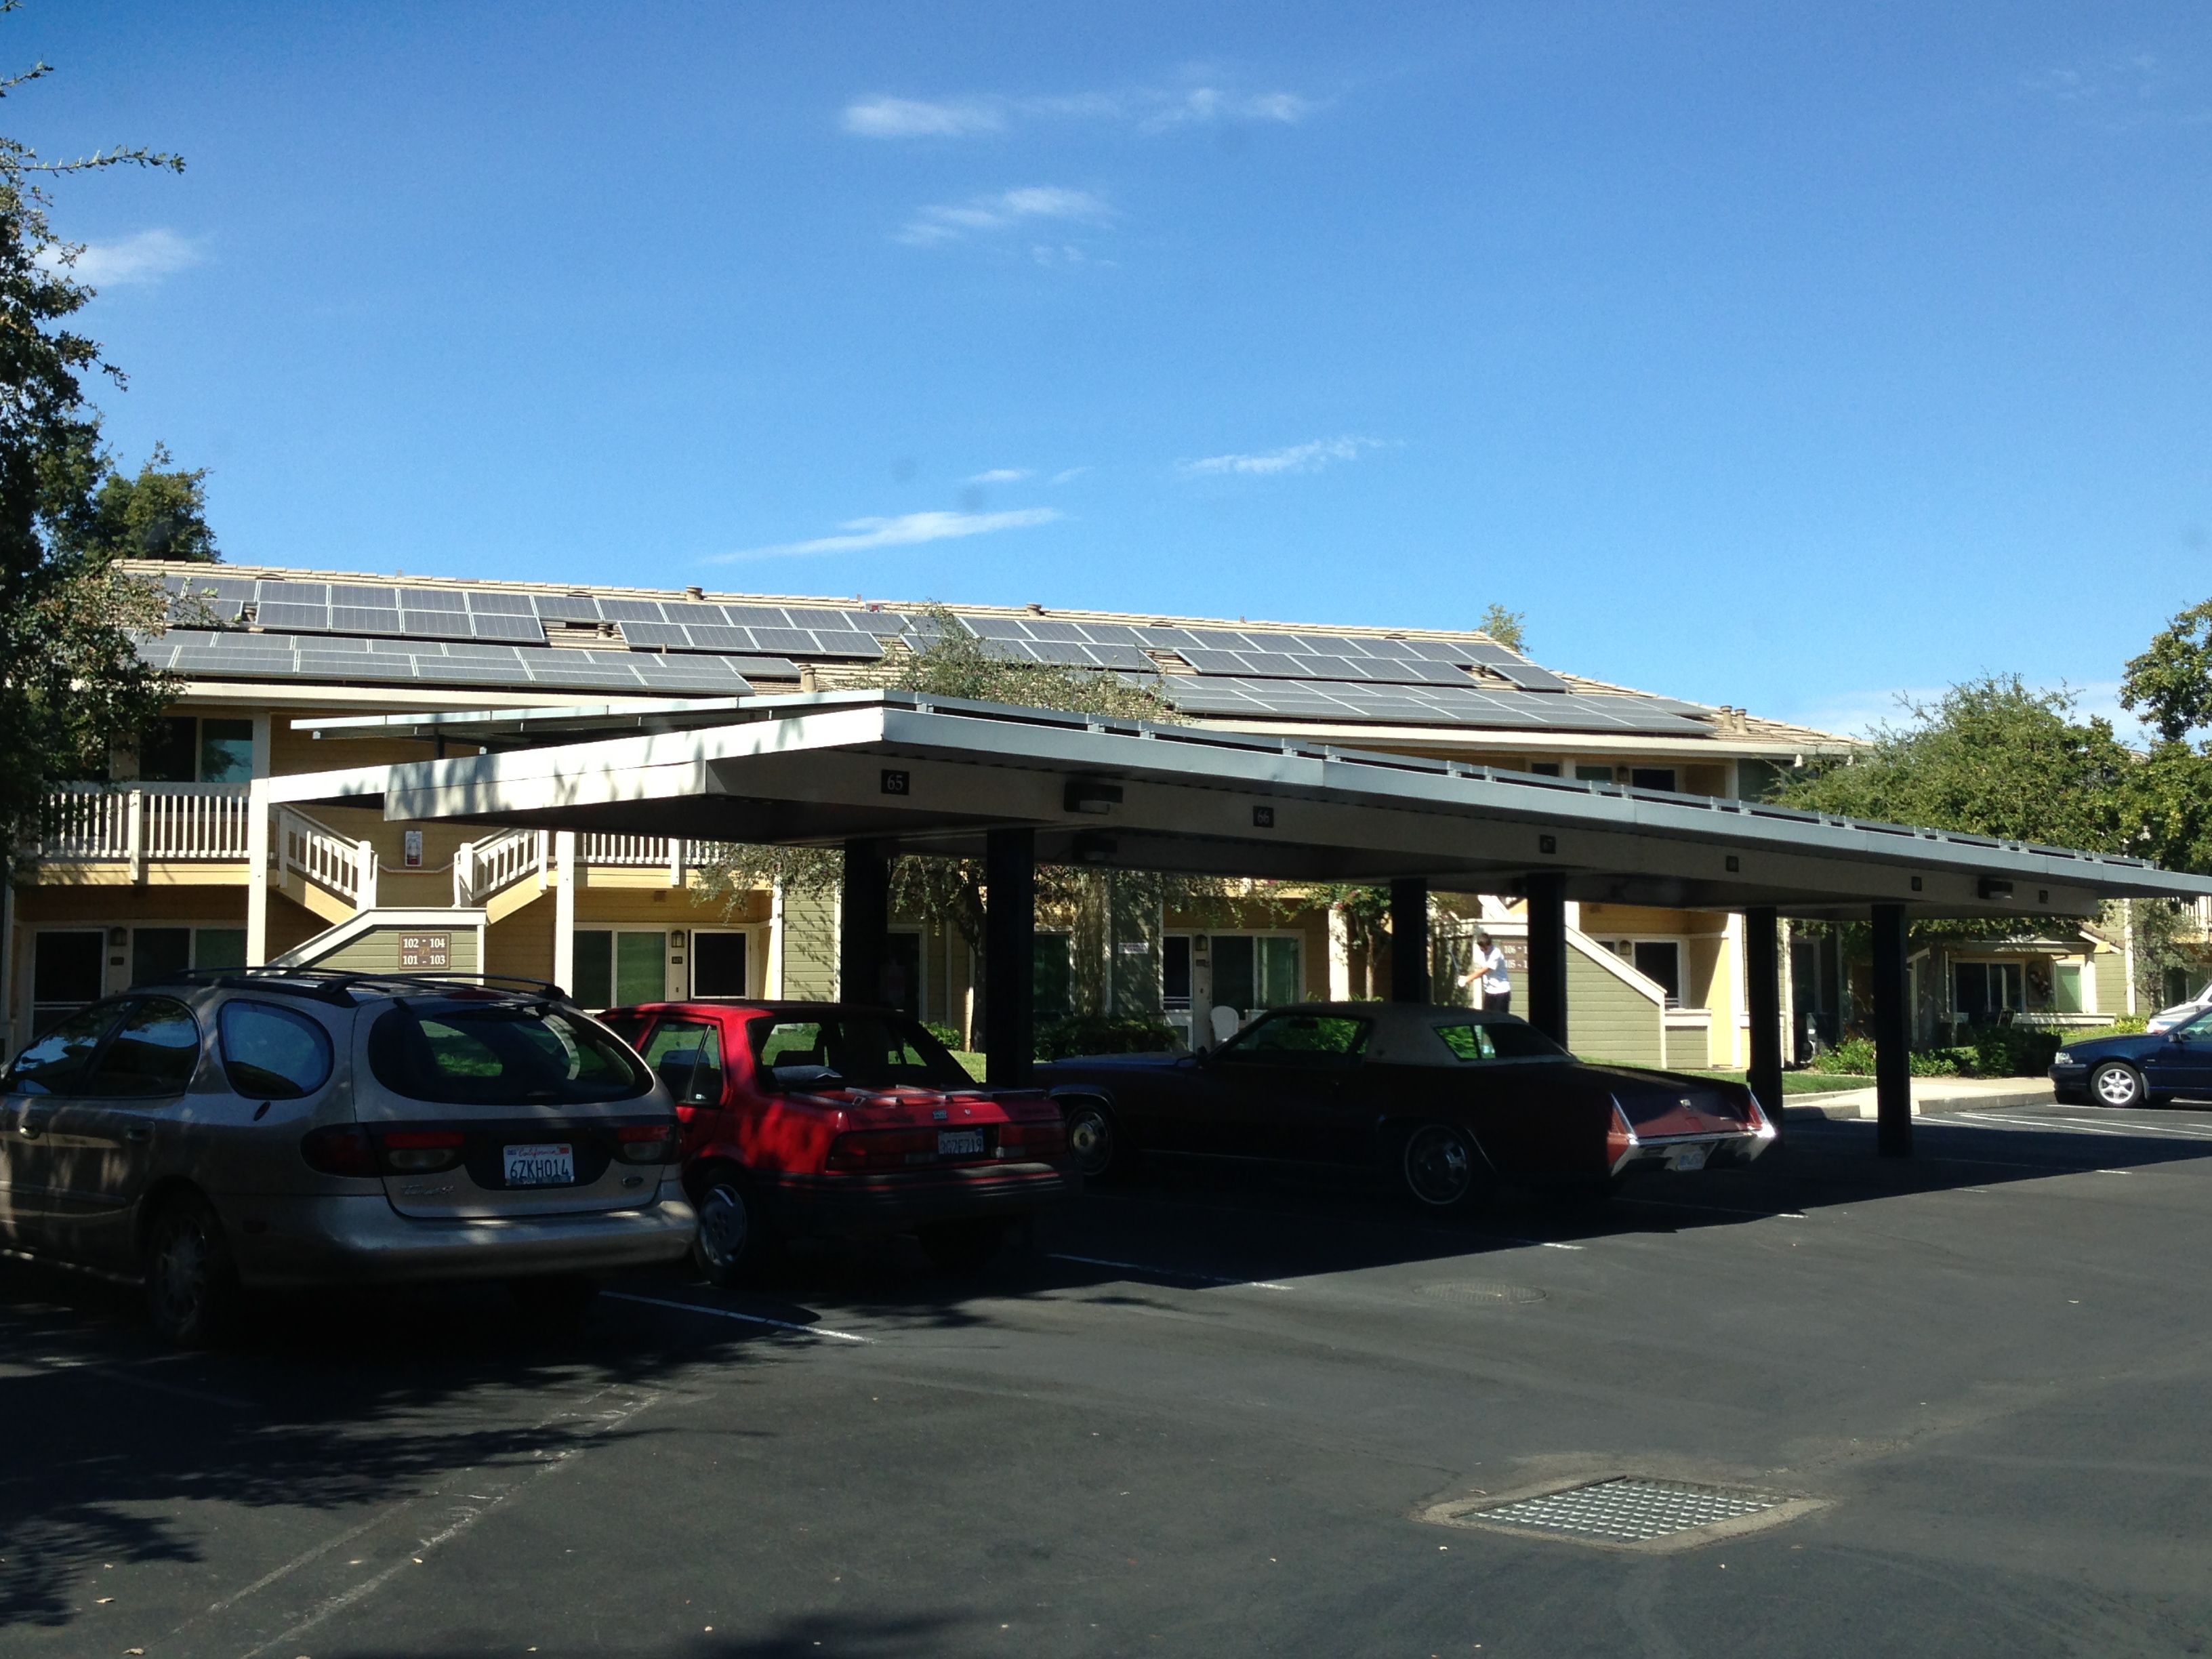 Beutler Corp. installed solar using a decentralized PV design concept across rooftops and carports. 